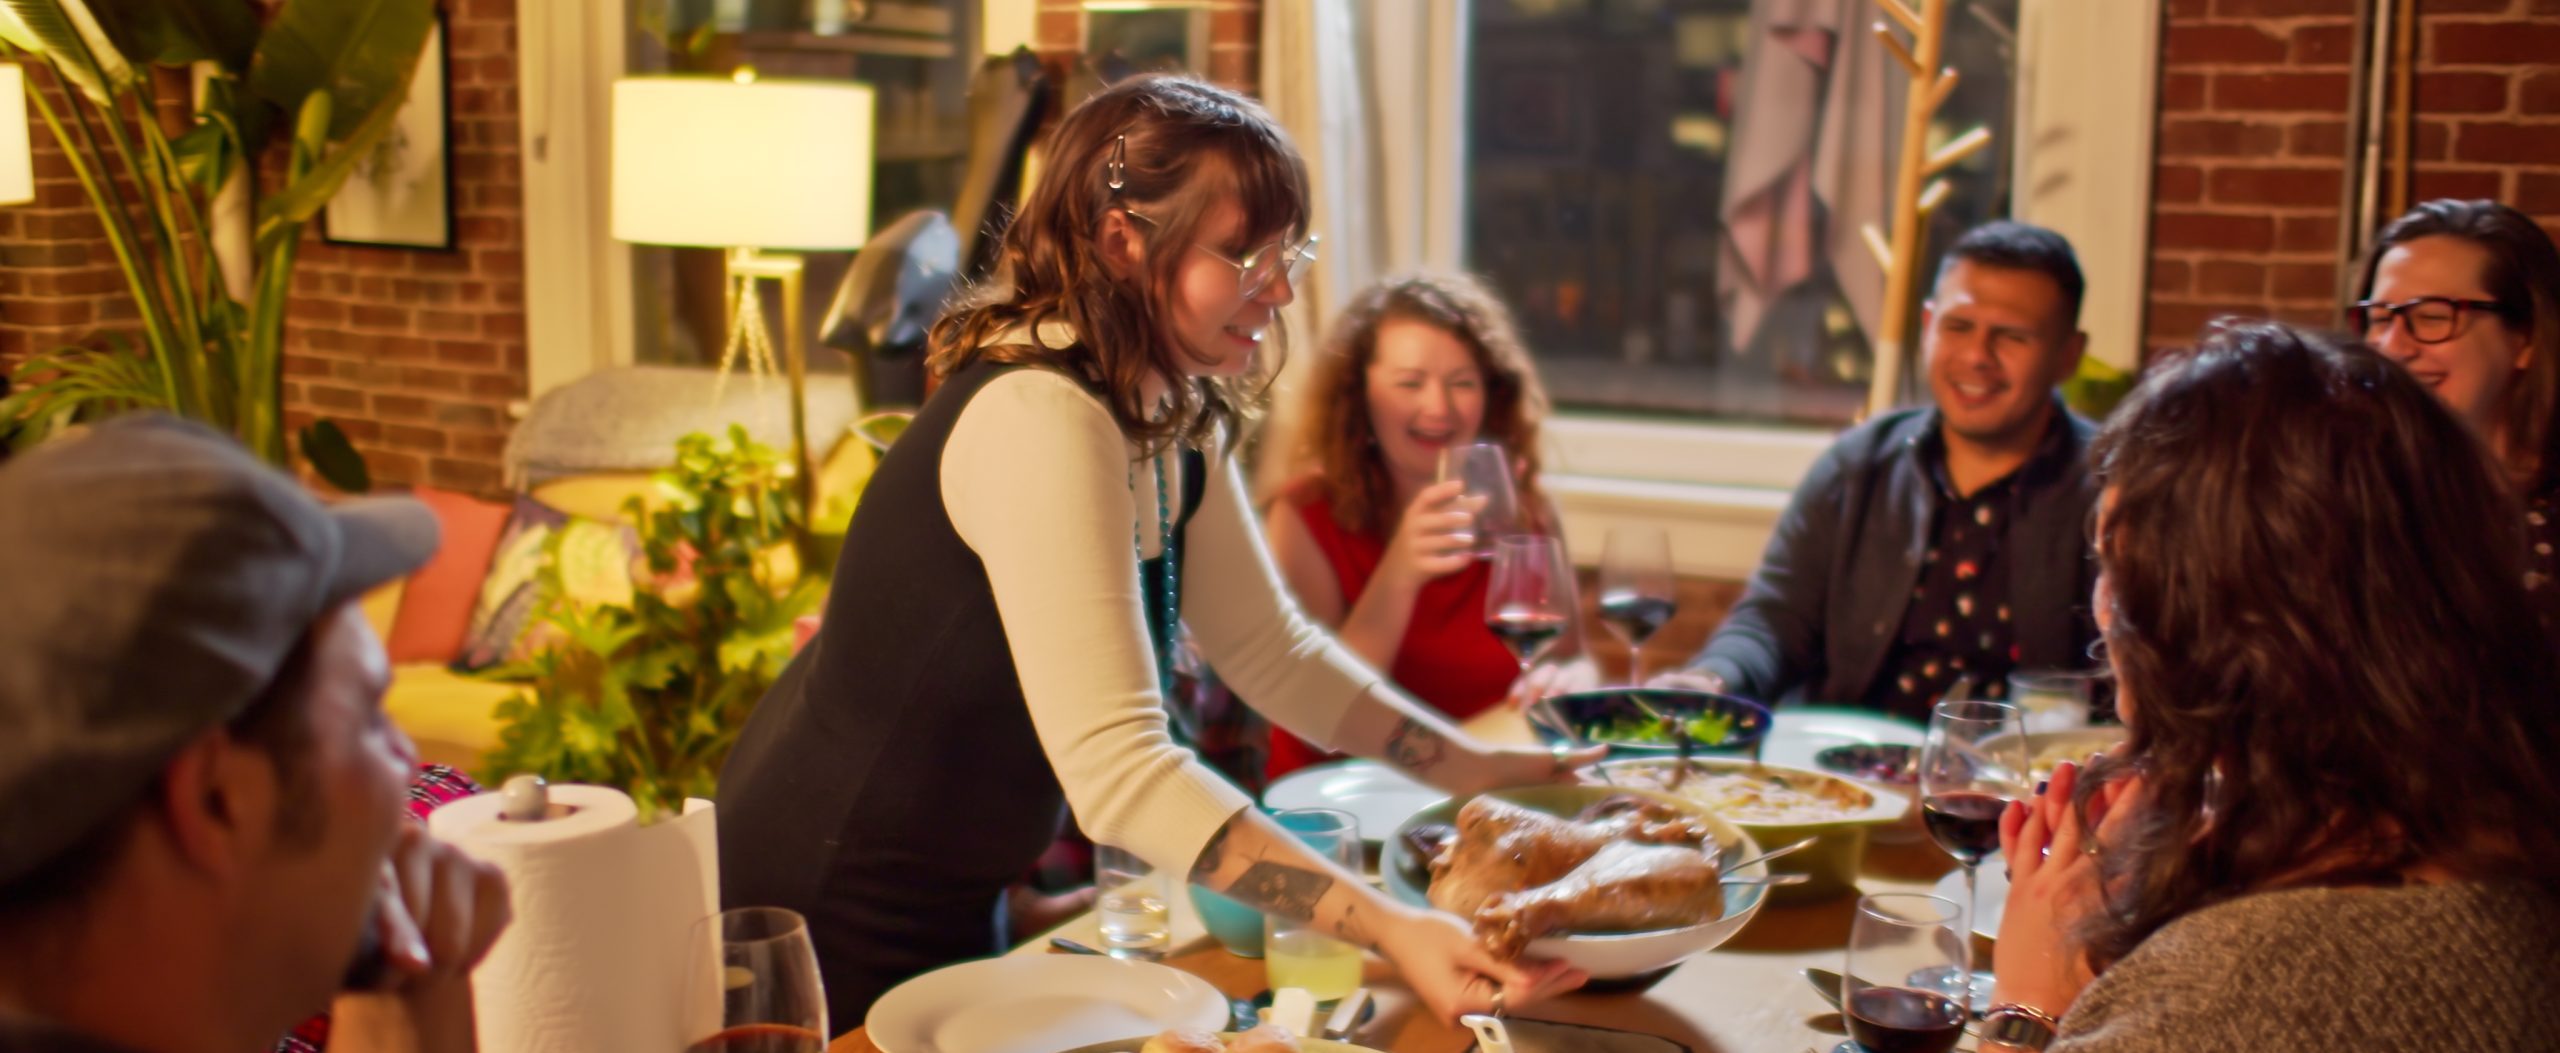 A woman serves a platter to a group gathered around a dining table.